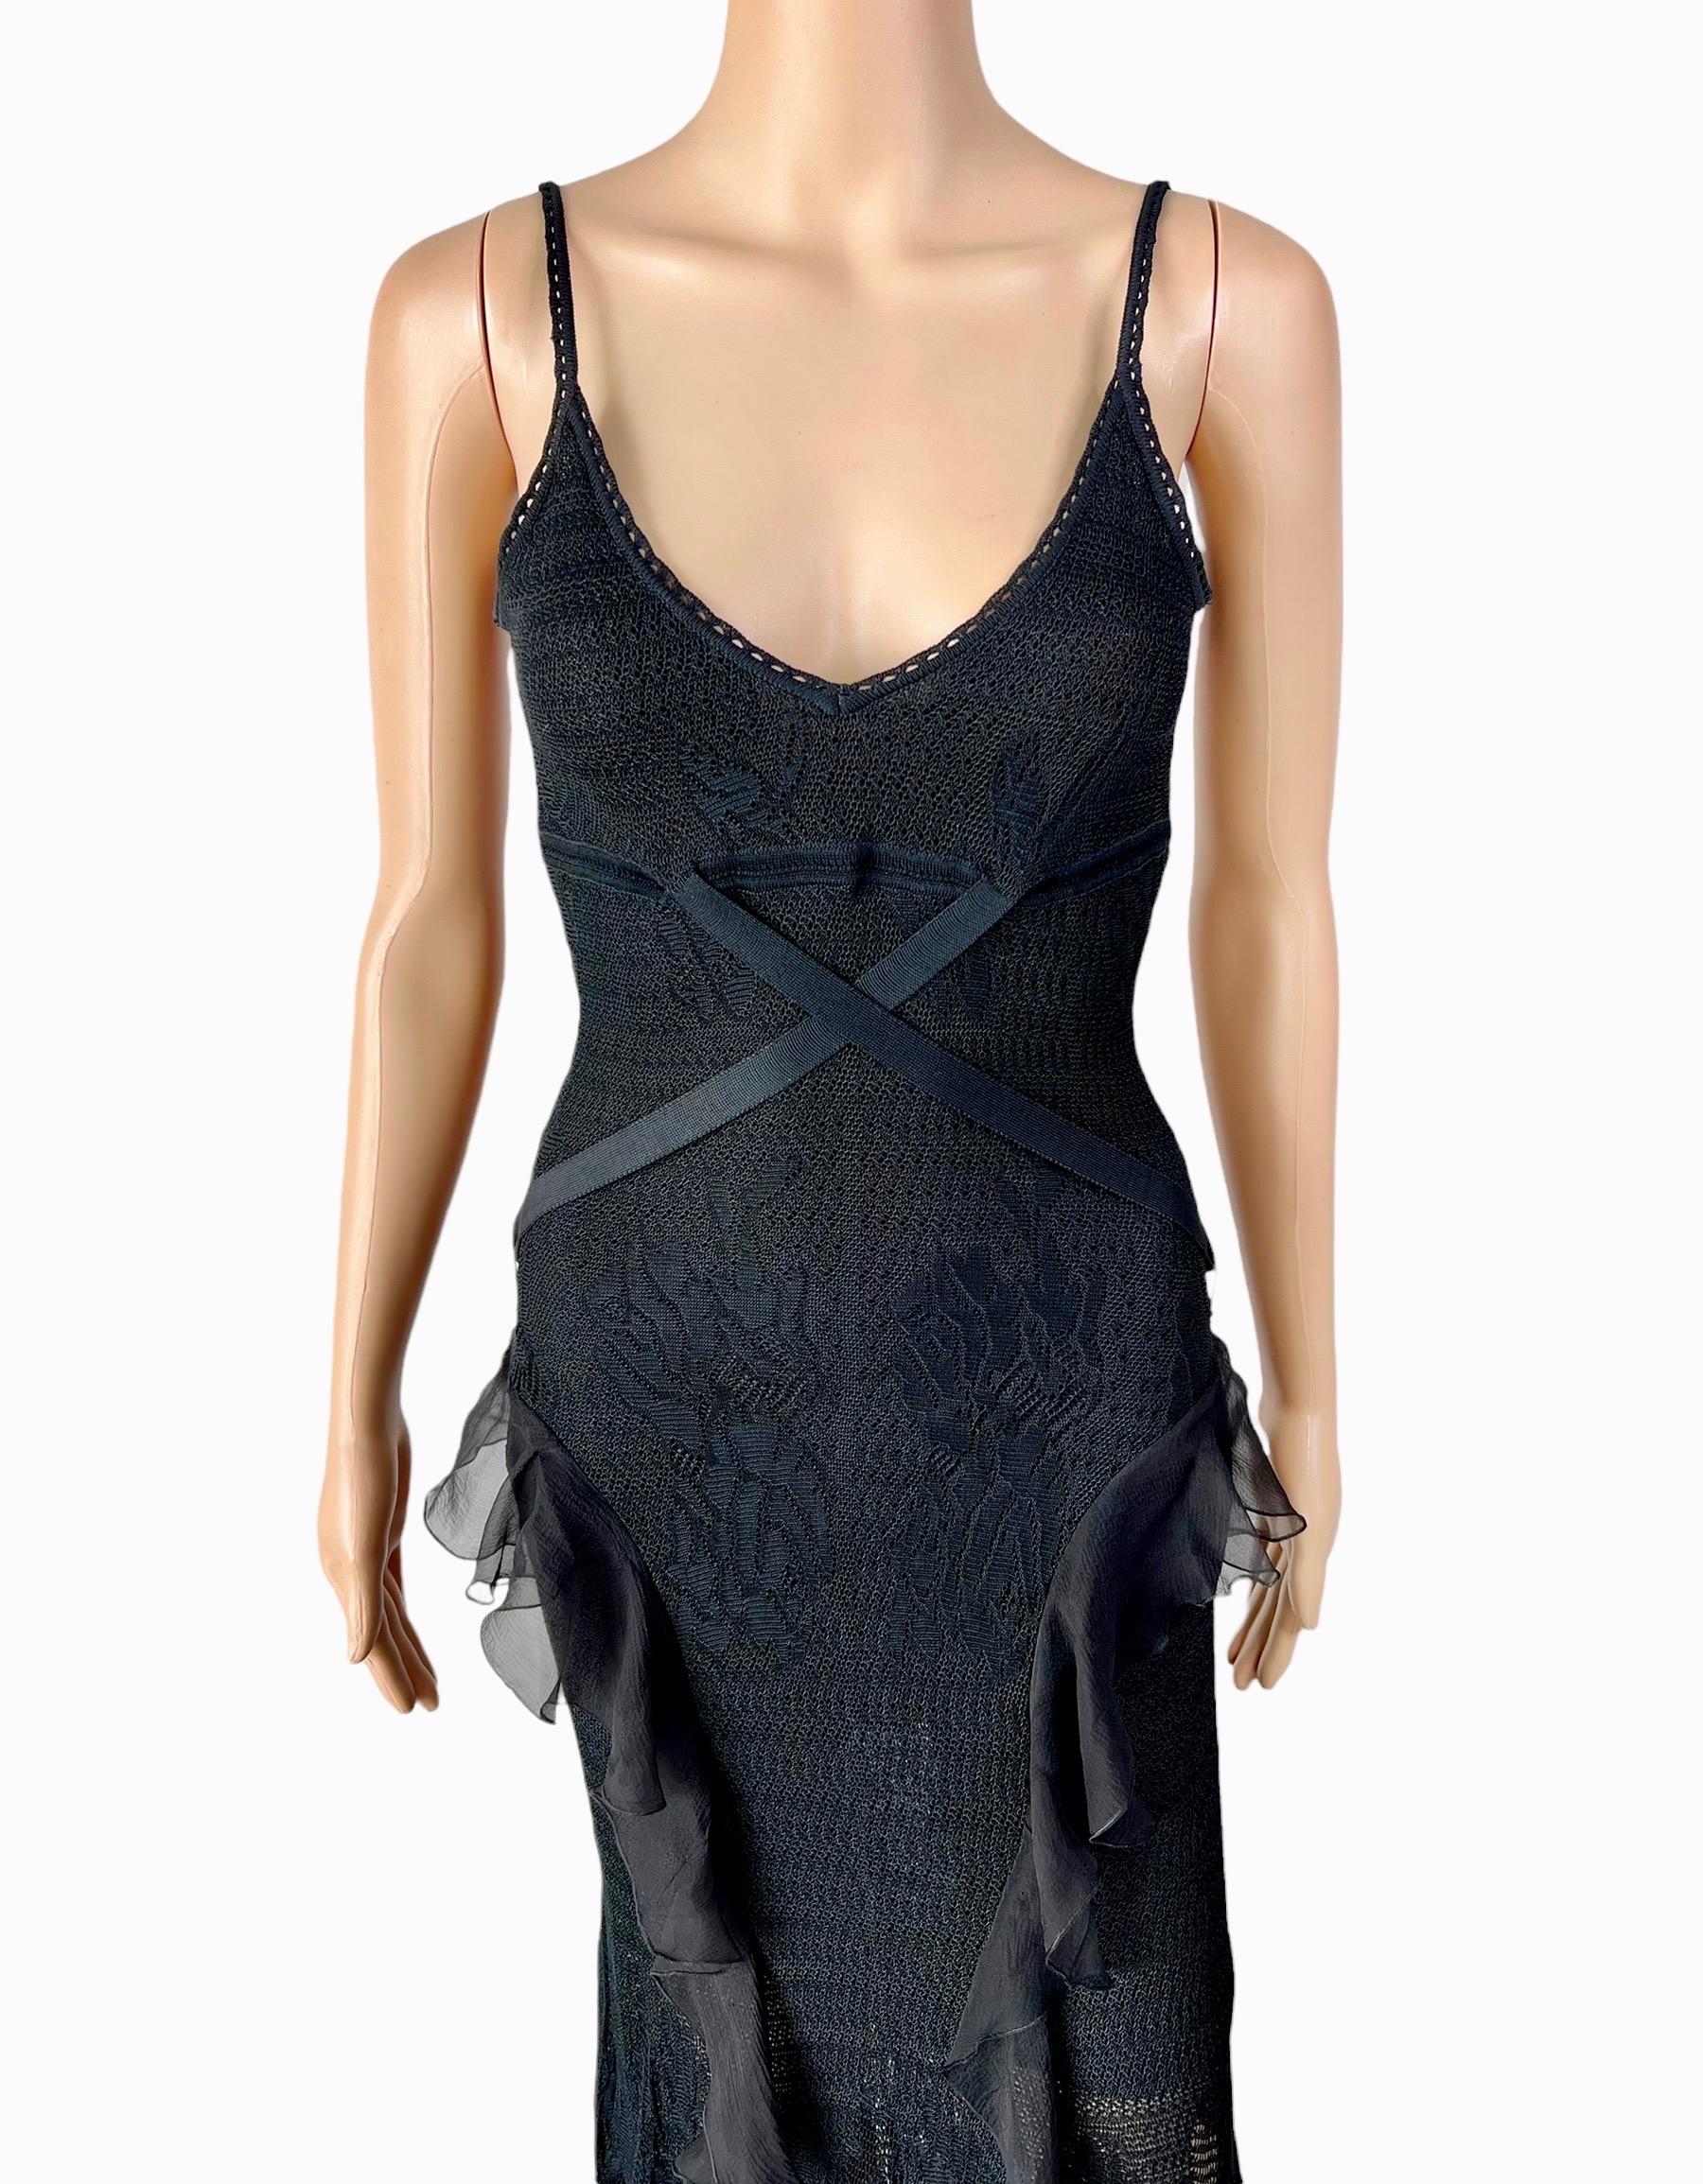 Women's Christian Dior by John Galliano S/S2003 Sheer Lace Knit Black Evening Dress Gown For Sale